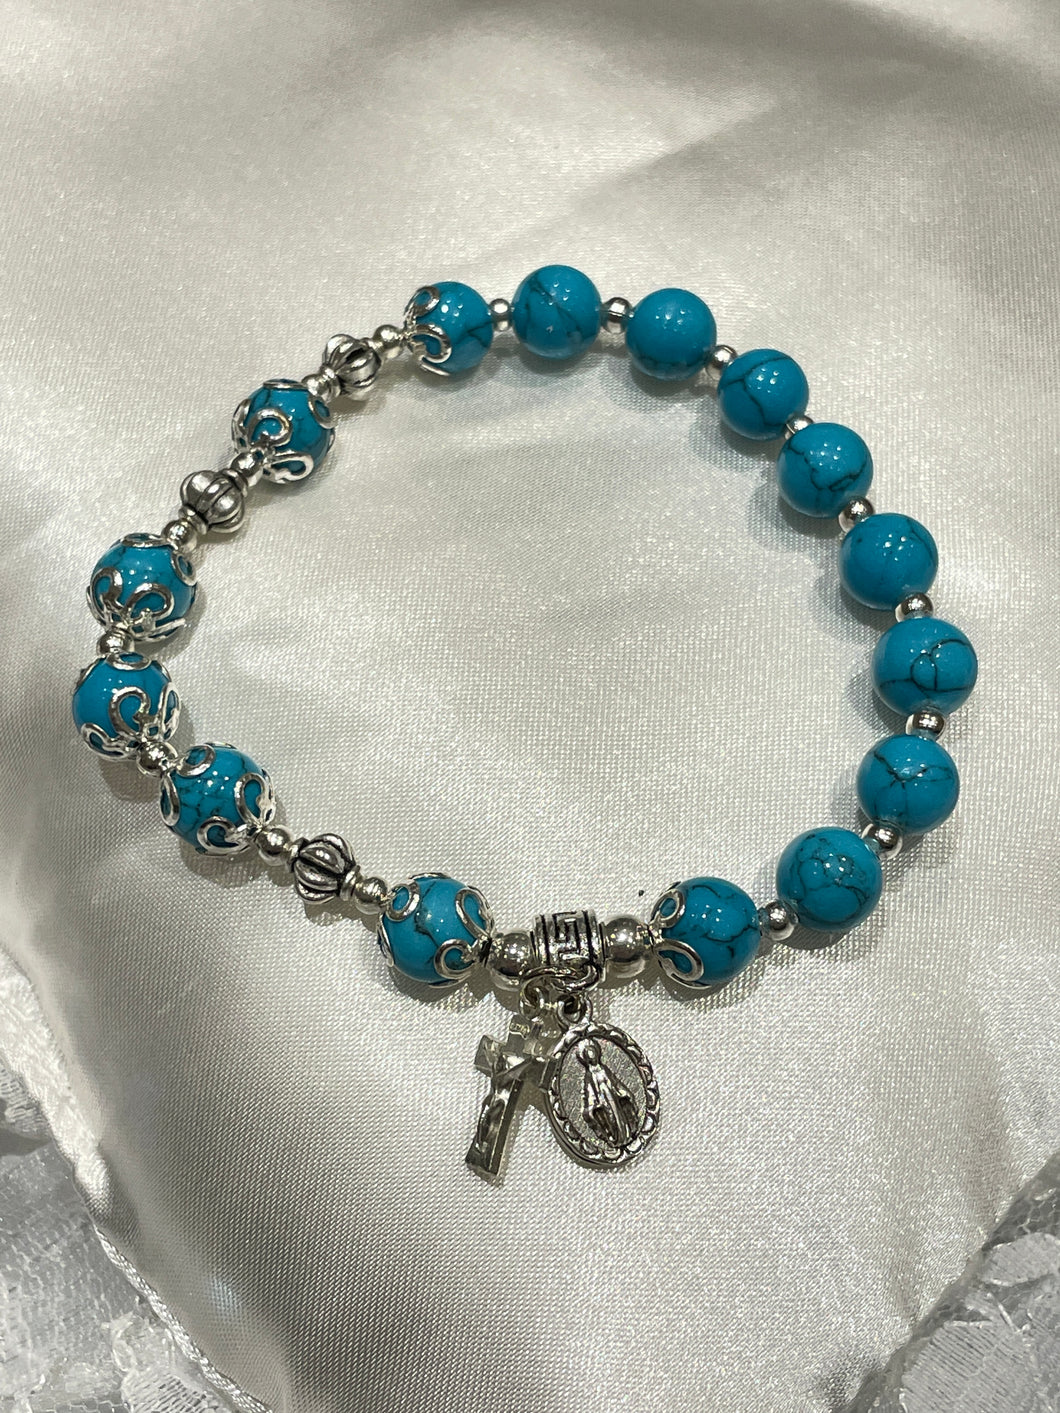 Blue Gemstone Rosary Bracelet with Miraculous Medal and Crucifix Charms